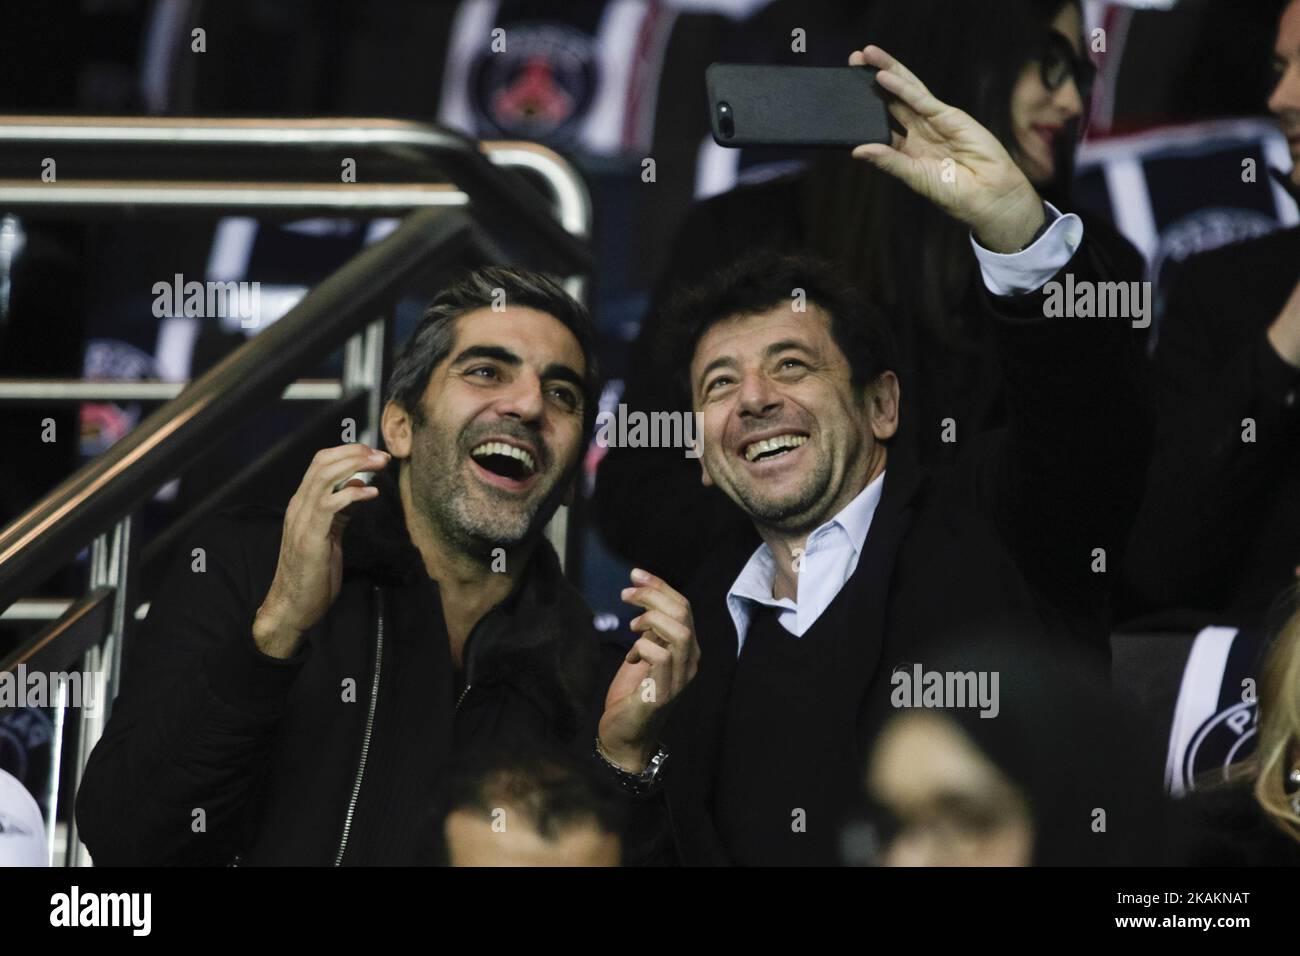 French comedian Ary Abittan (L) and French singer Patrick Bruel (R) attend the UEFA Champions League round of 16 first leg football match between Paris Saint-Germain and FC Barcelona on February 14, 2017 at the Parc des Princes stadium in Paris. (Photo by Geoffroy Van der Hasselt/NurPhoto) *** Please Use Credit from Credit Field *** Stock Photo